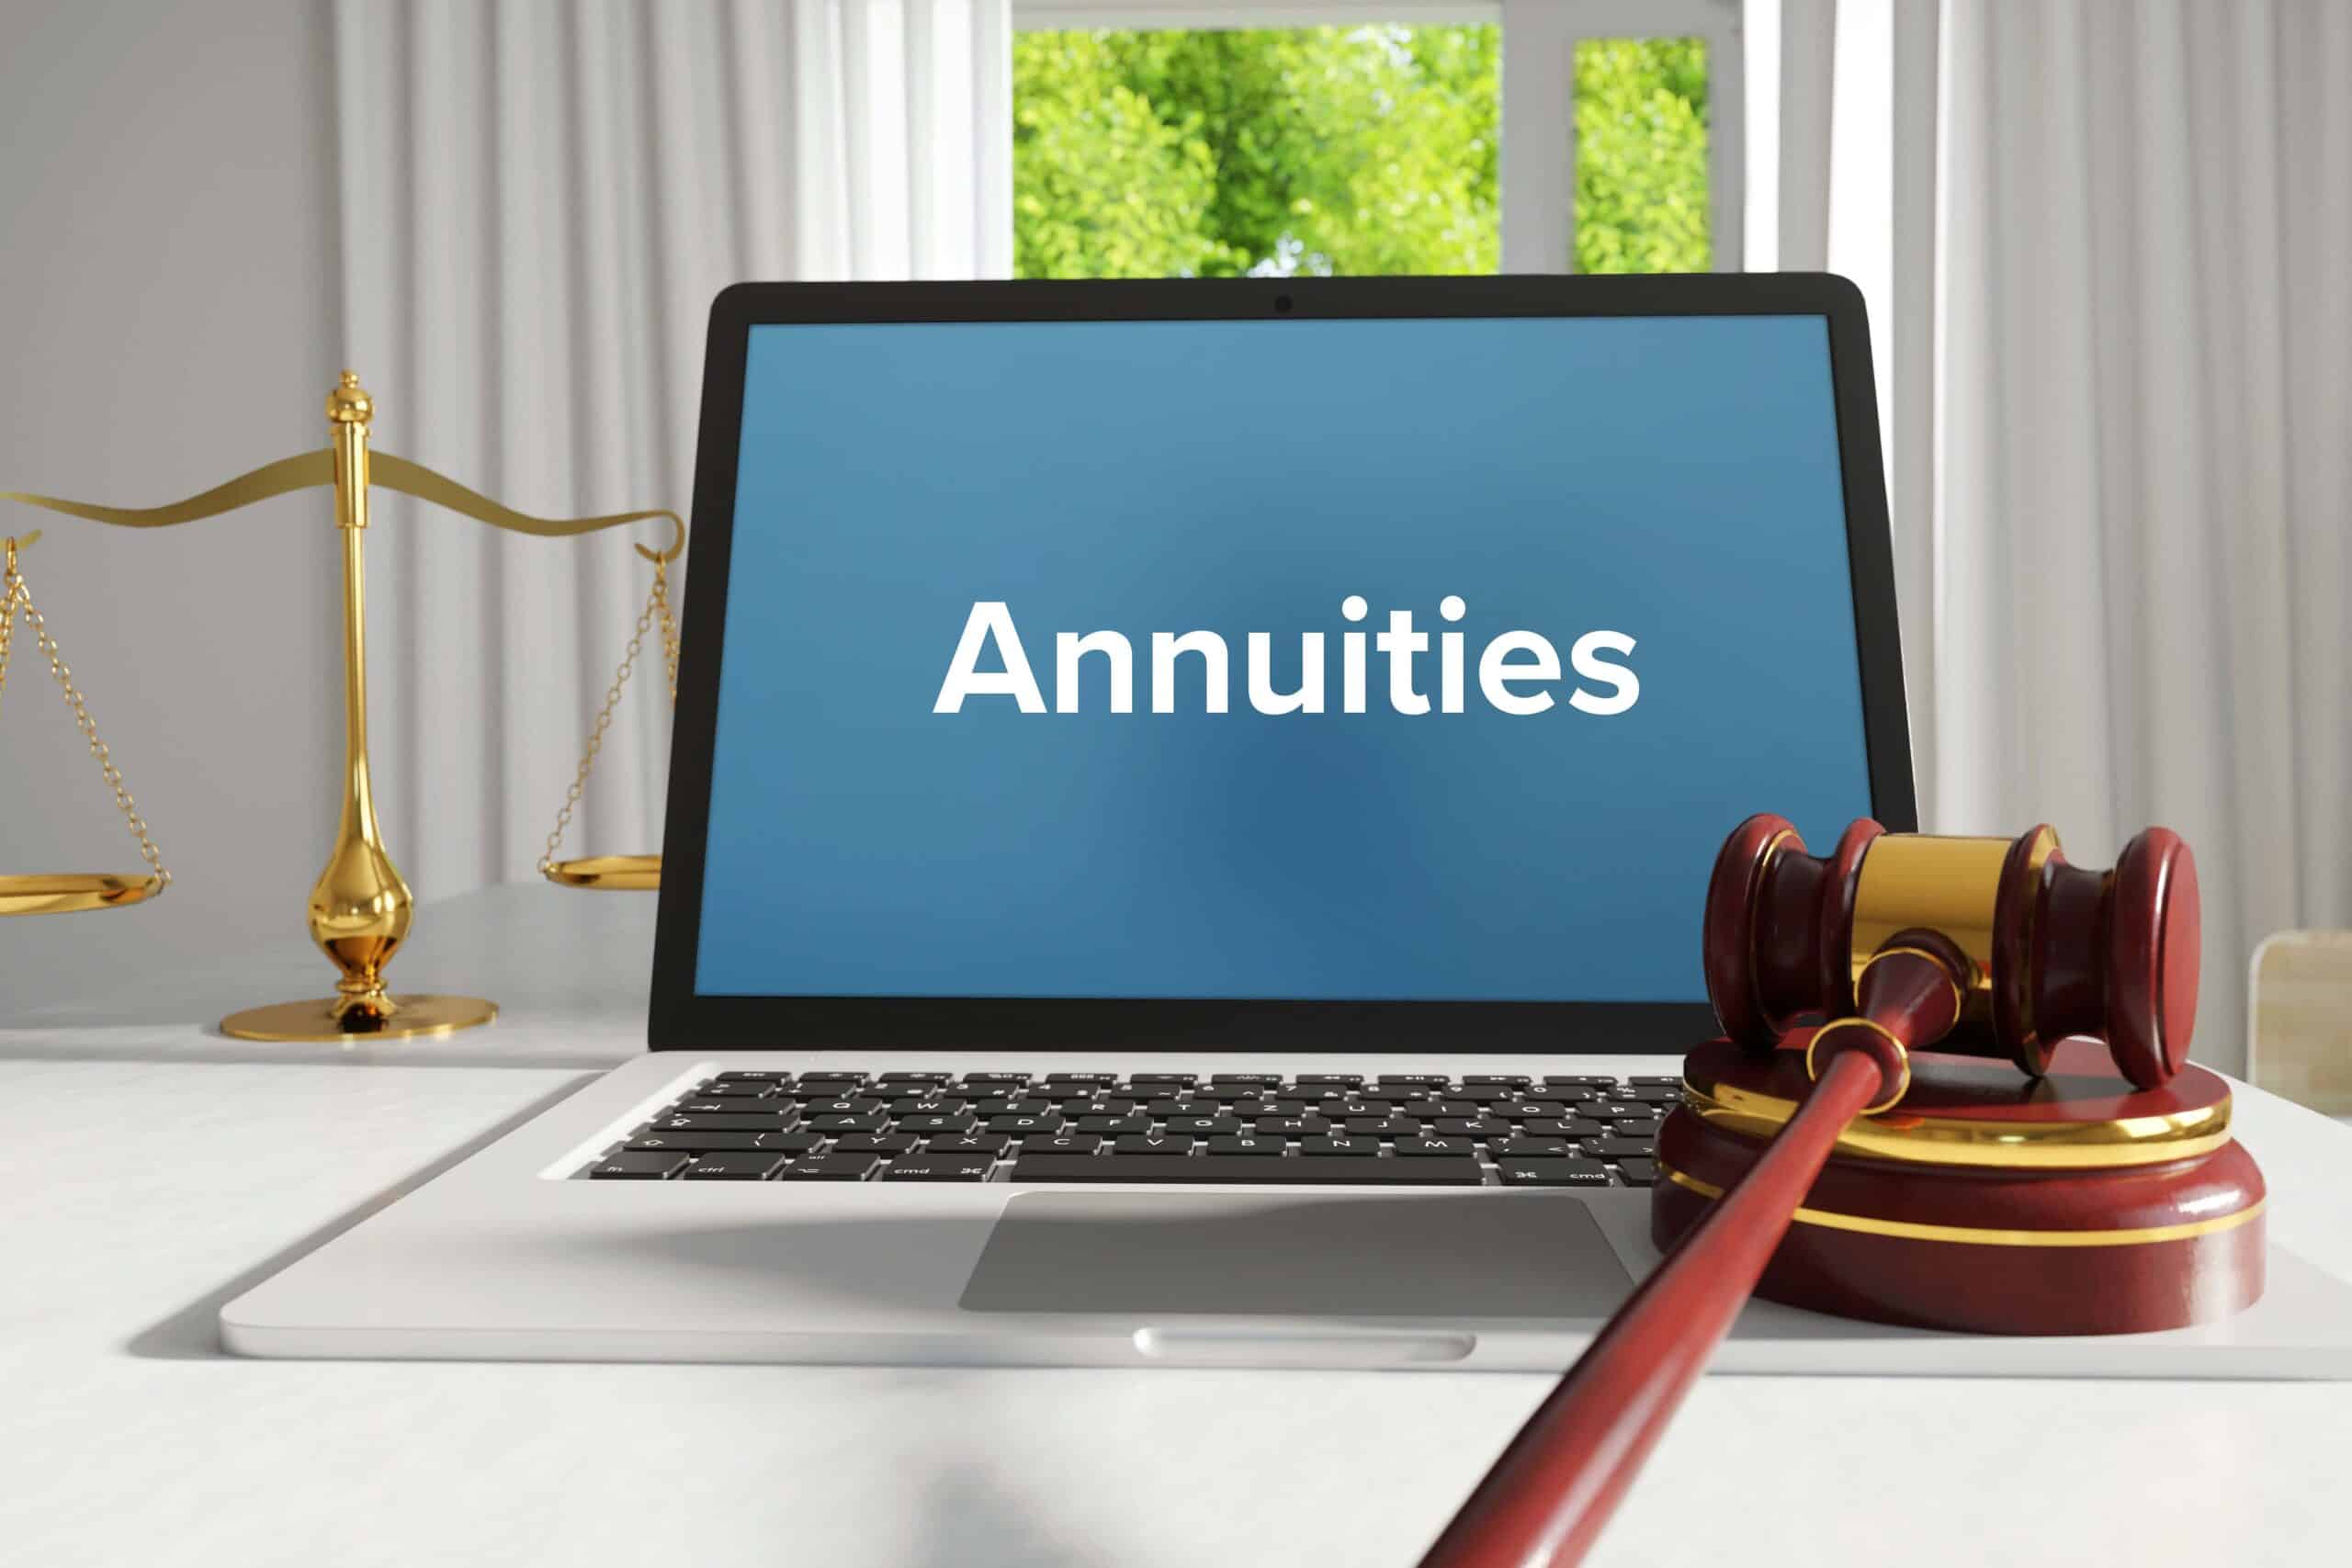 Laptop with "annuities" on the screen.